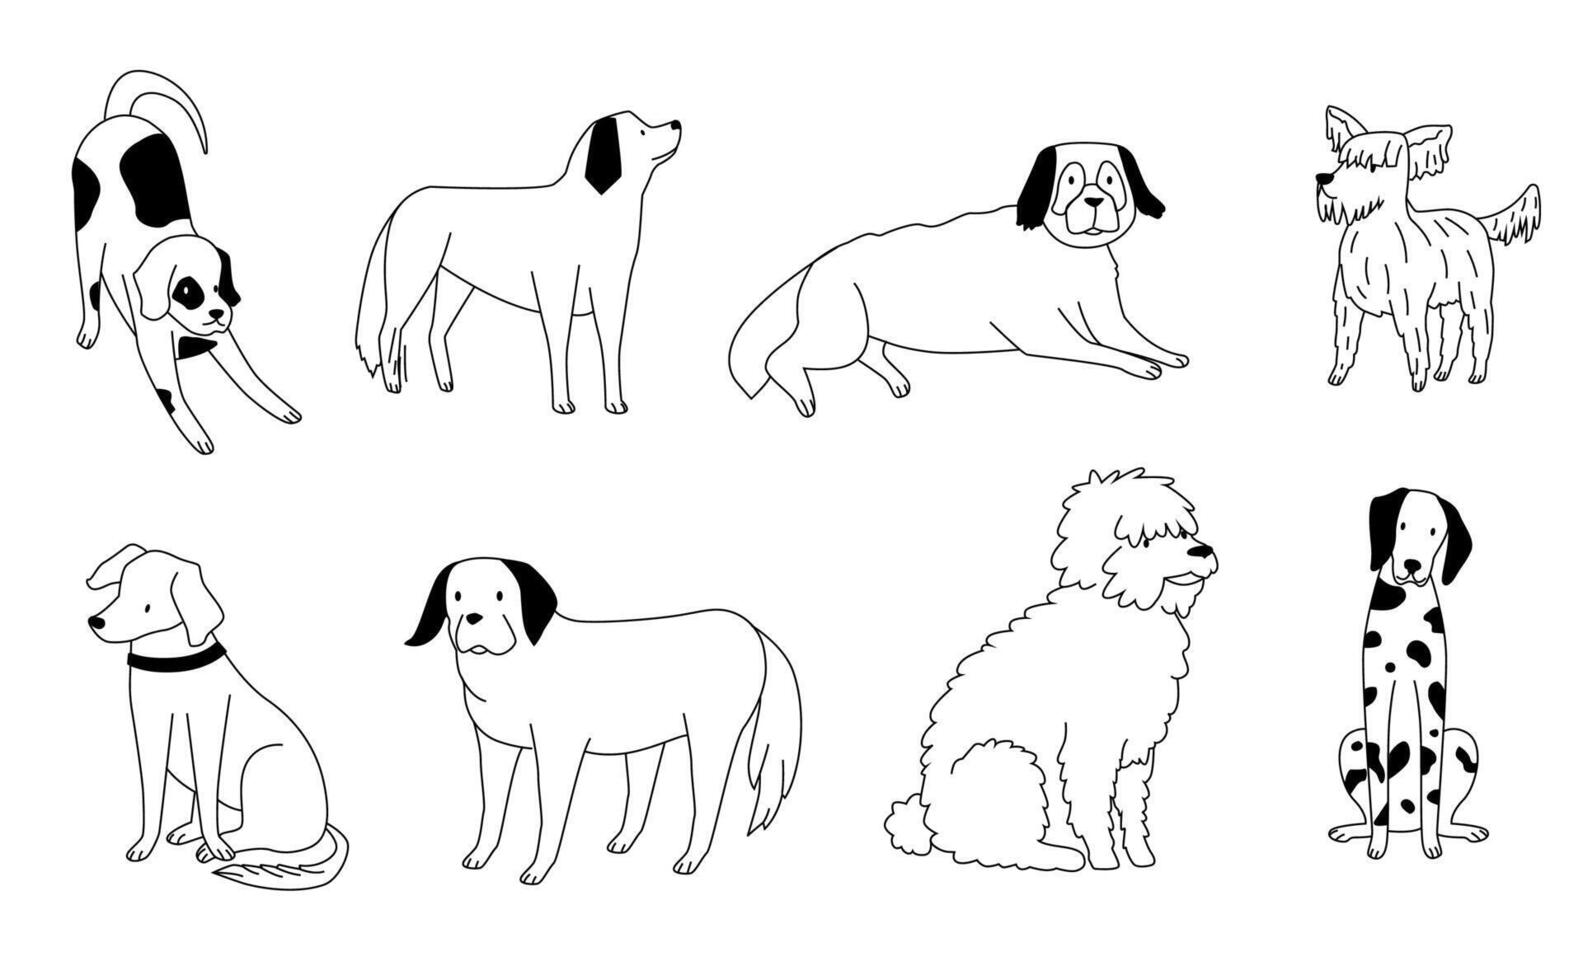 Cute doodle dog. Outlined black puppies in various positions. Hand drawn playing, running and lying. Adorable animal friends vector